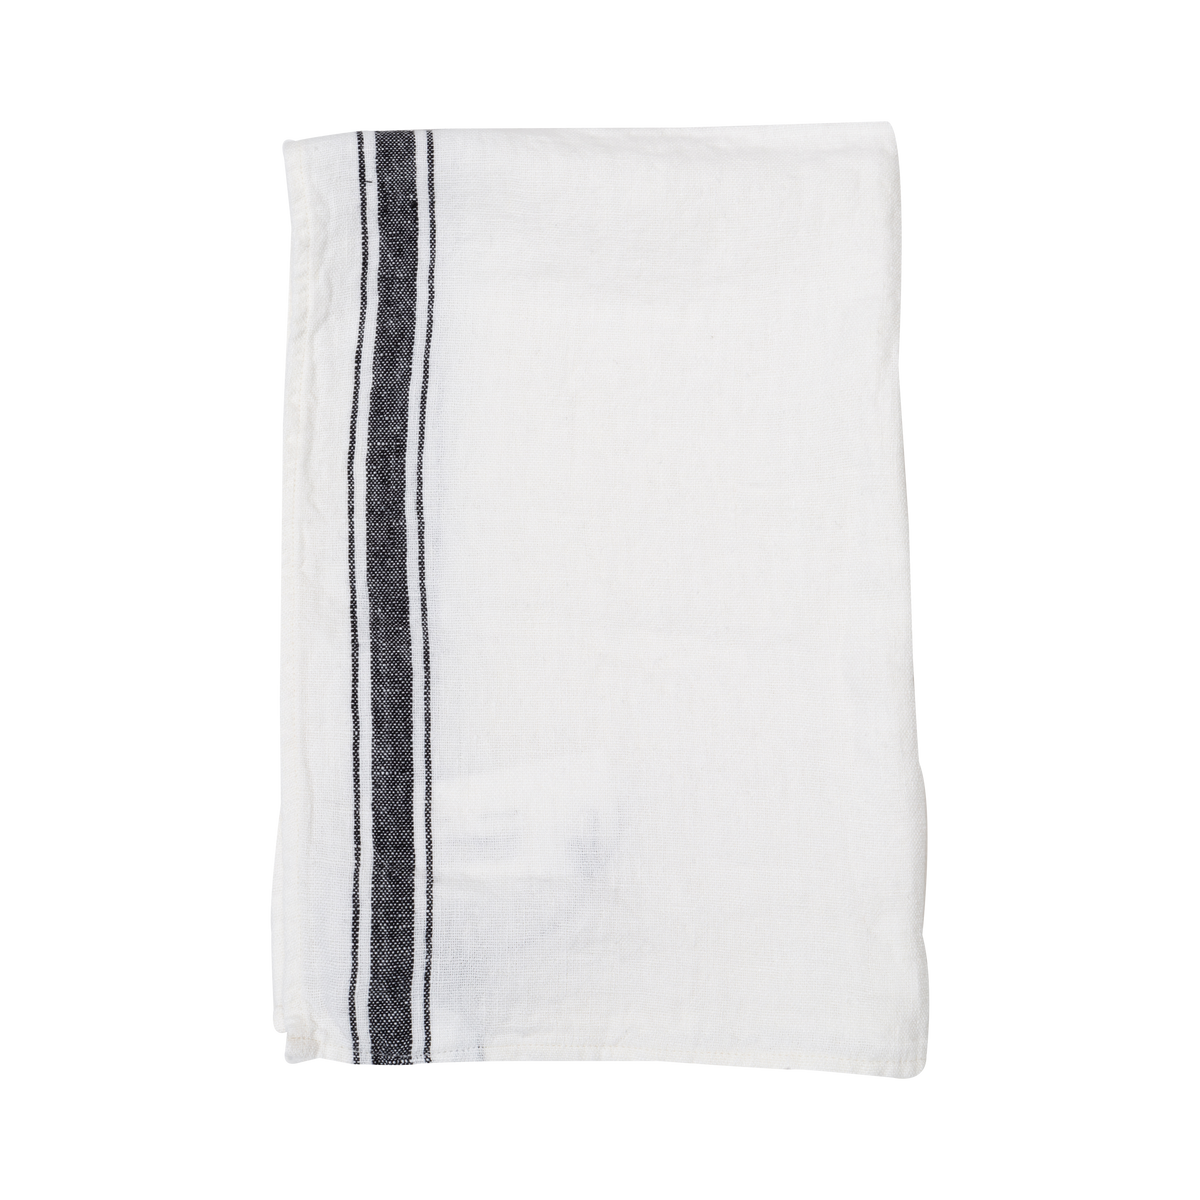 This Stonewashed Linen Tea Towel is sustainably crafted from 100% stonewash linen.